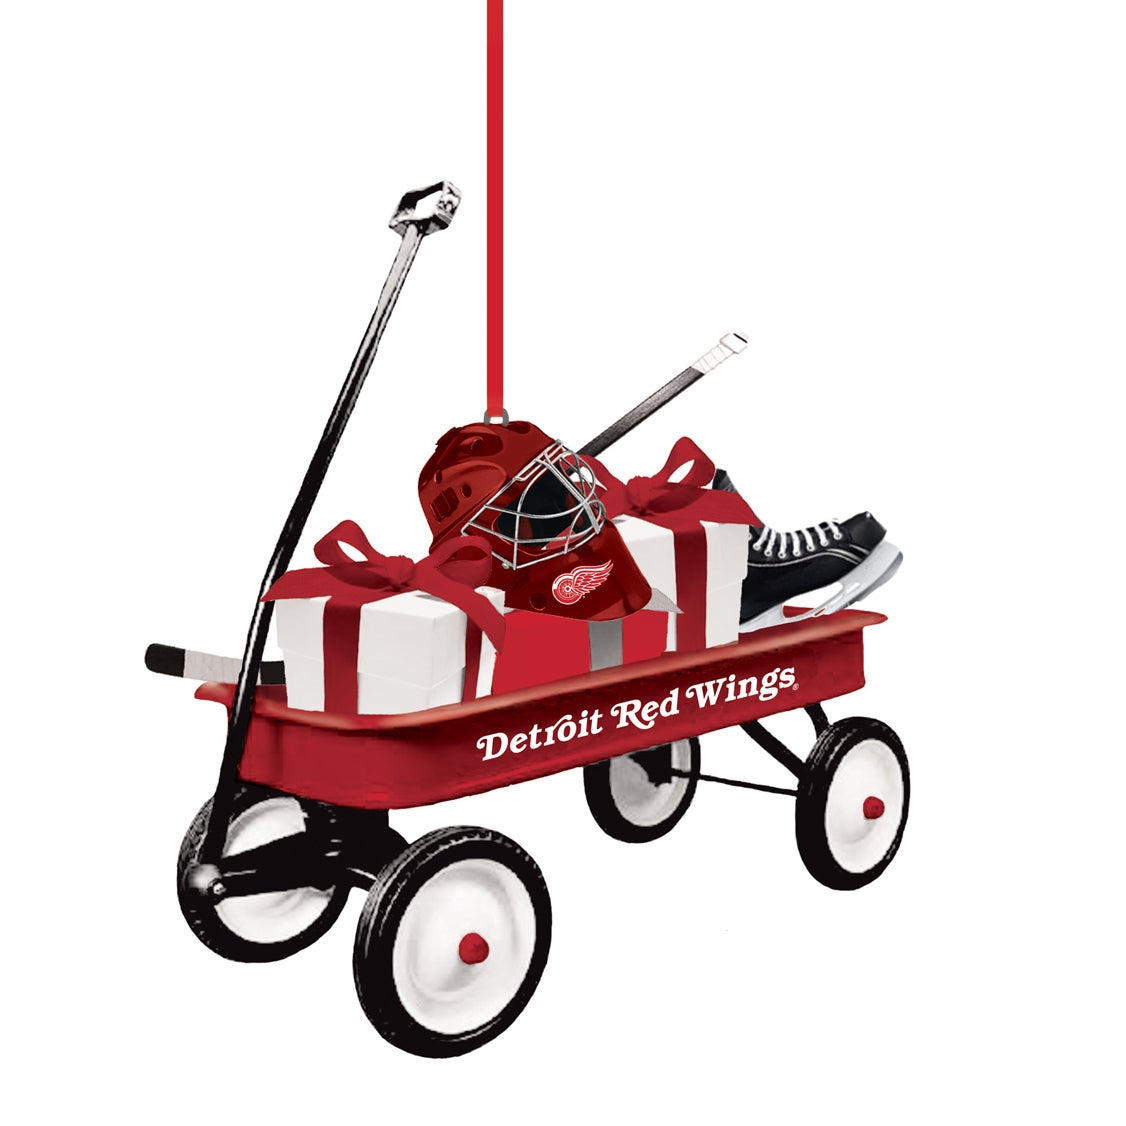 Detroit Red Wings Team Wagon Ornament